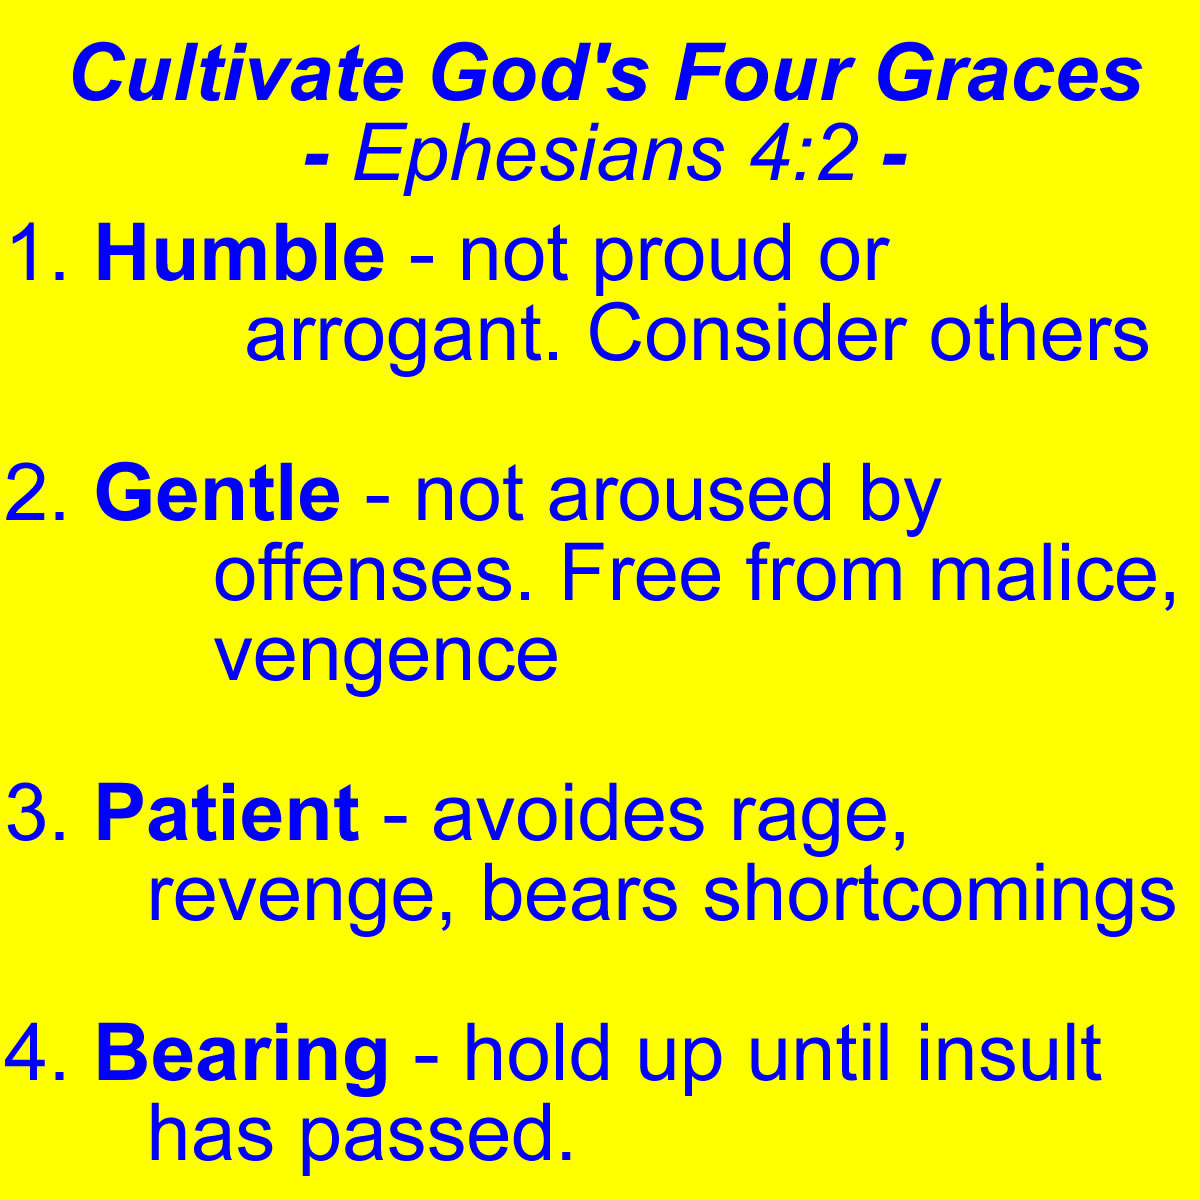 graces to cultivate